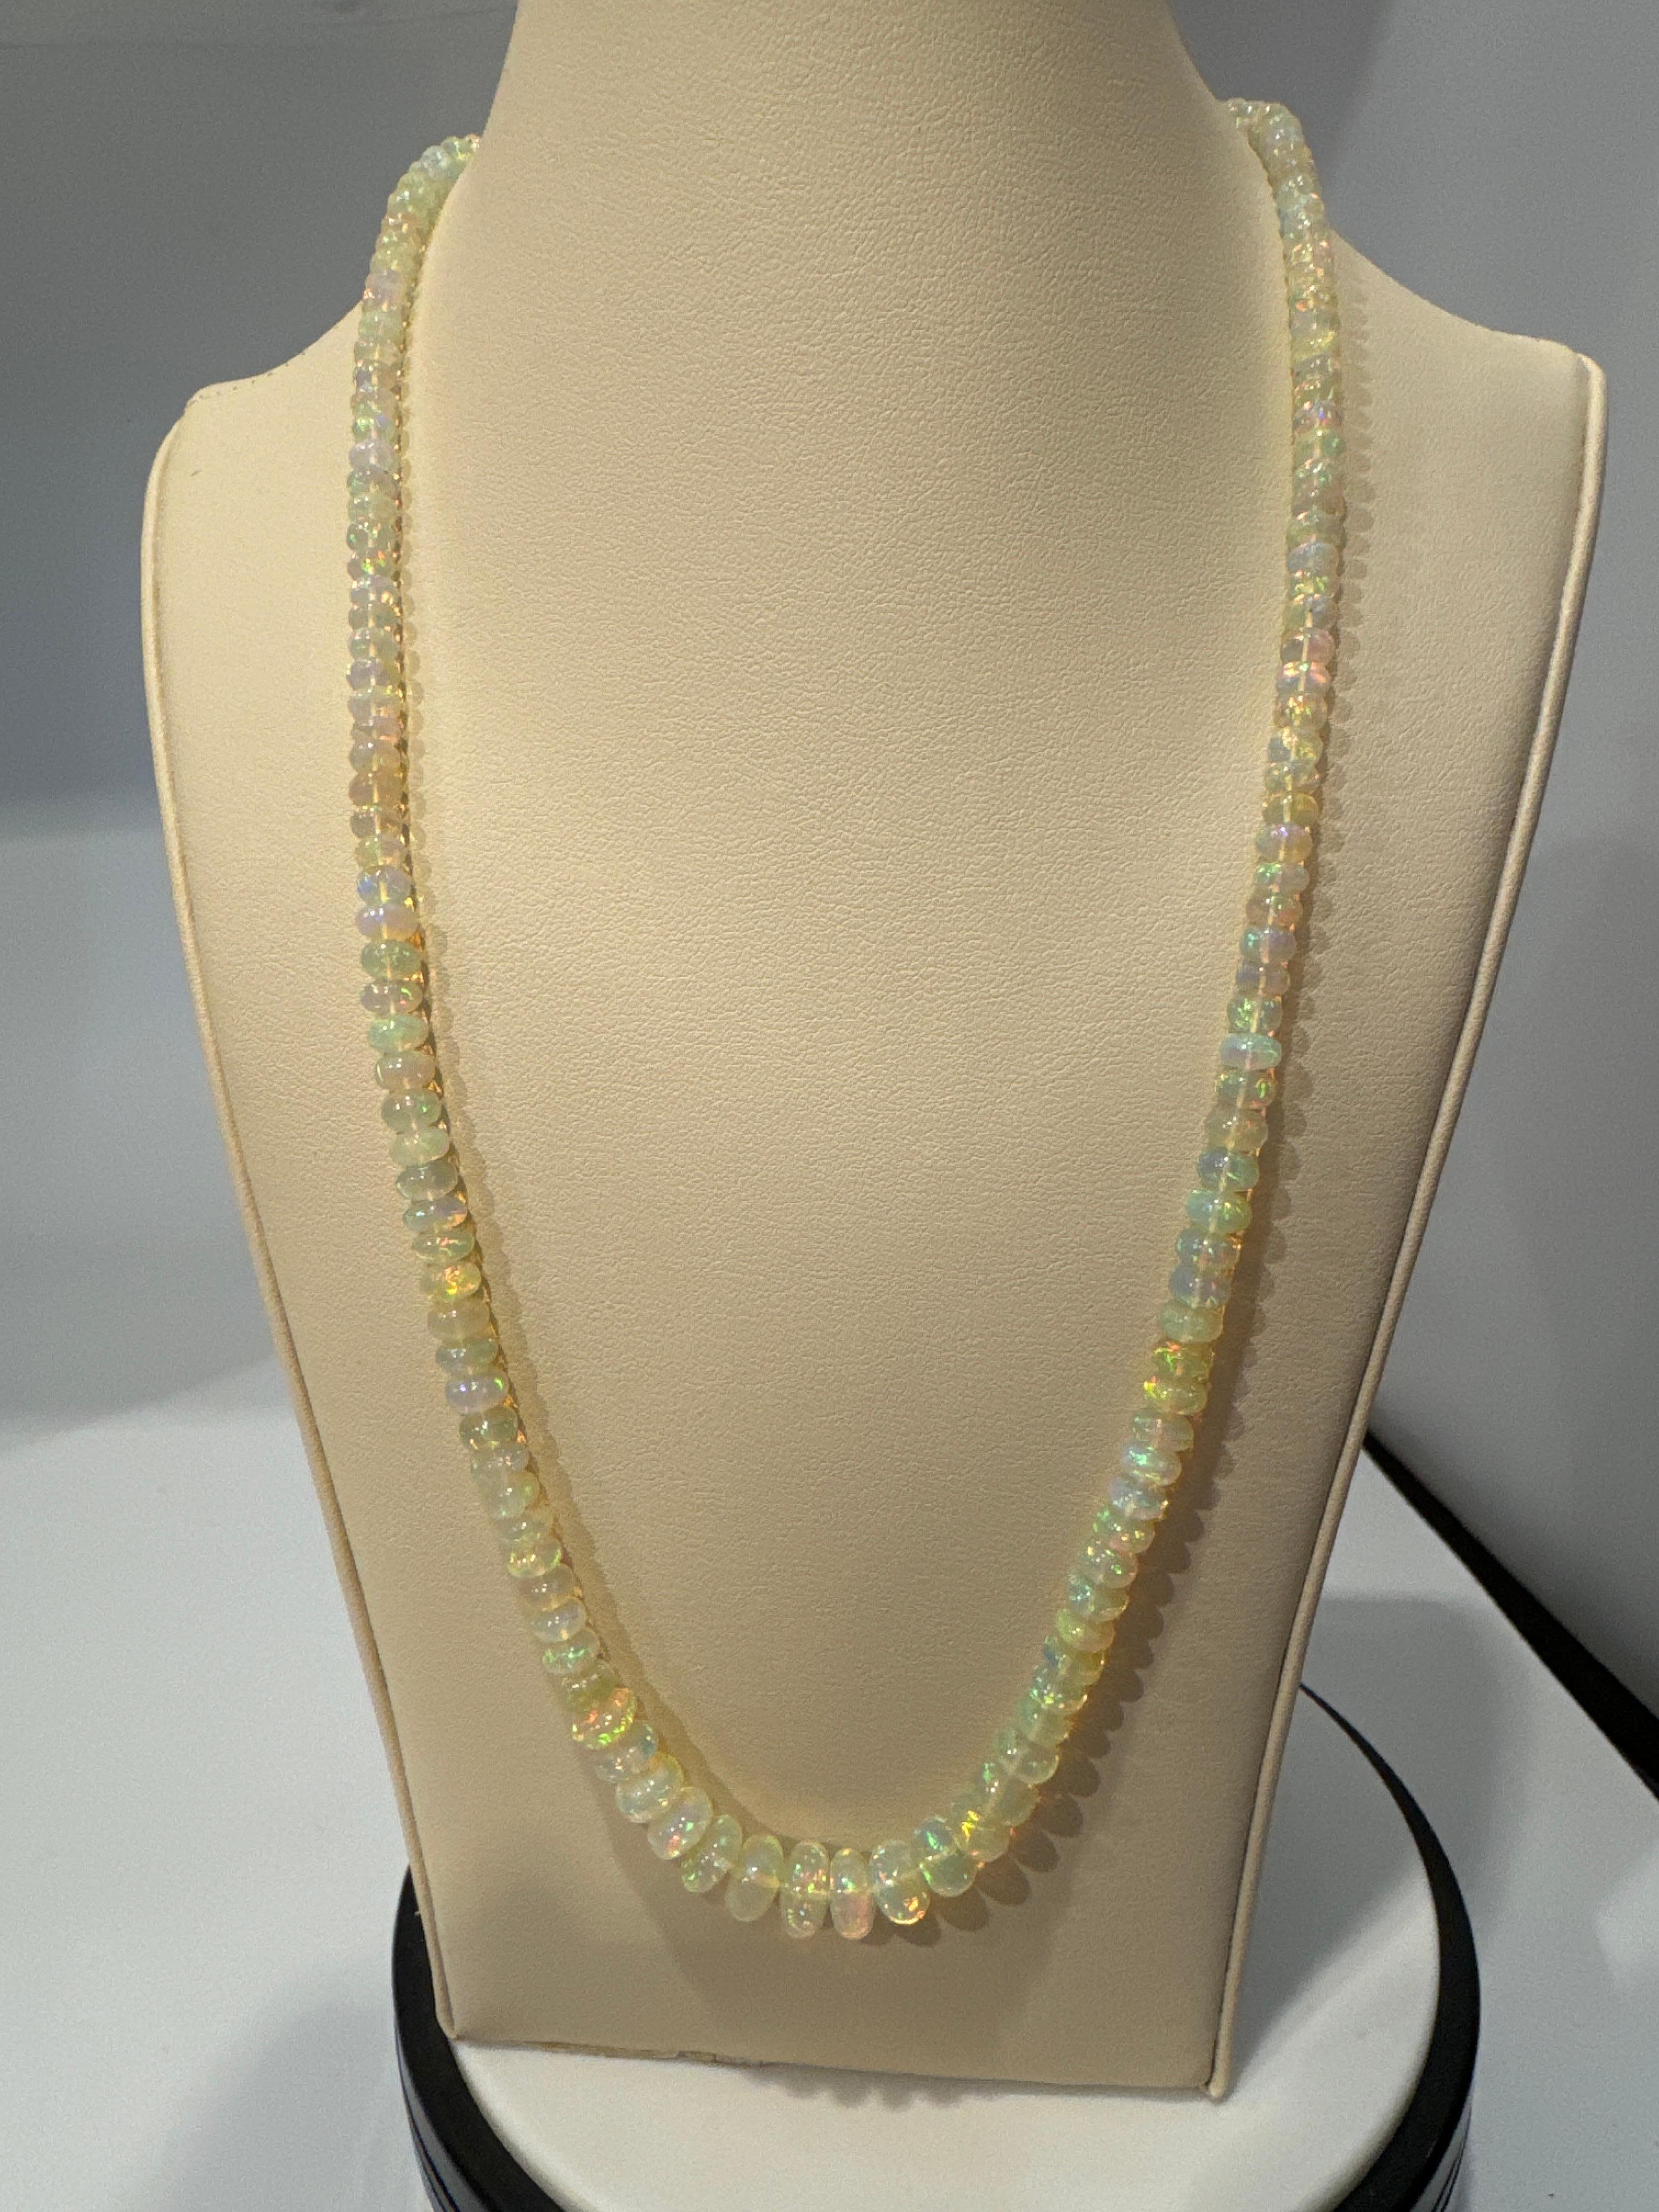 Natural Opal Faceted Bead Single Strand Necklace on Sale 14 K Gold Lobster Clasp For Sale 4